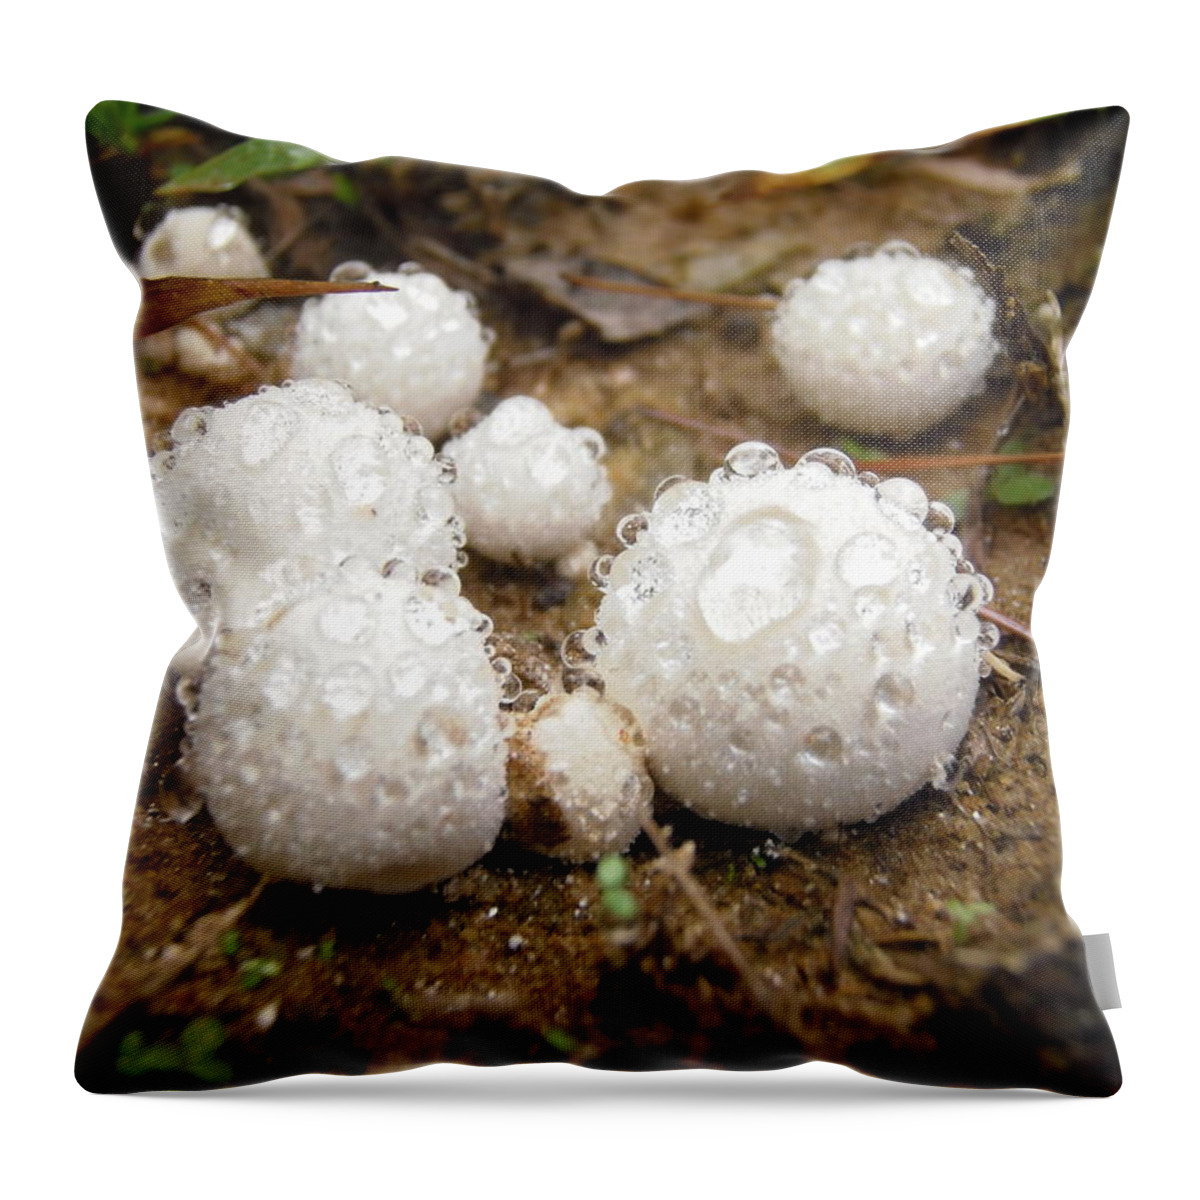 Fungi Throw Pillow featuring the photograph Common Puffball Dewdrop Harvest by Nicole Angell